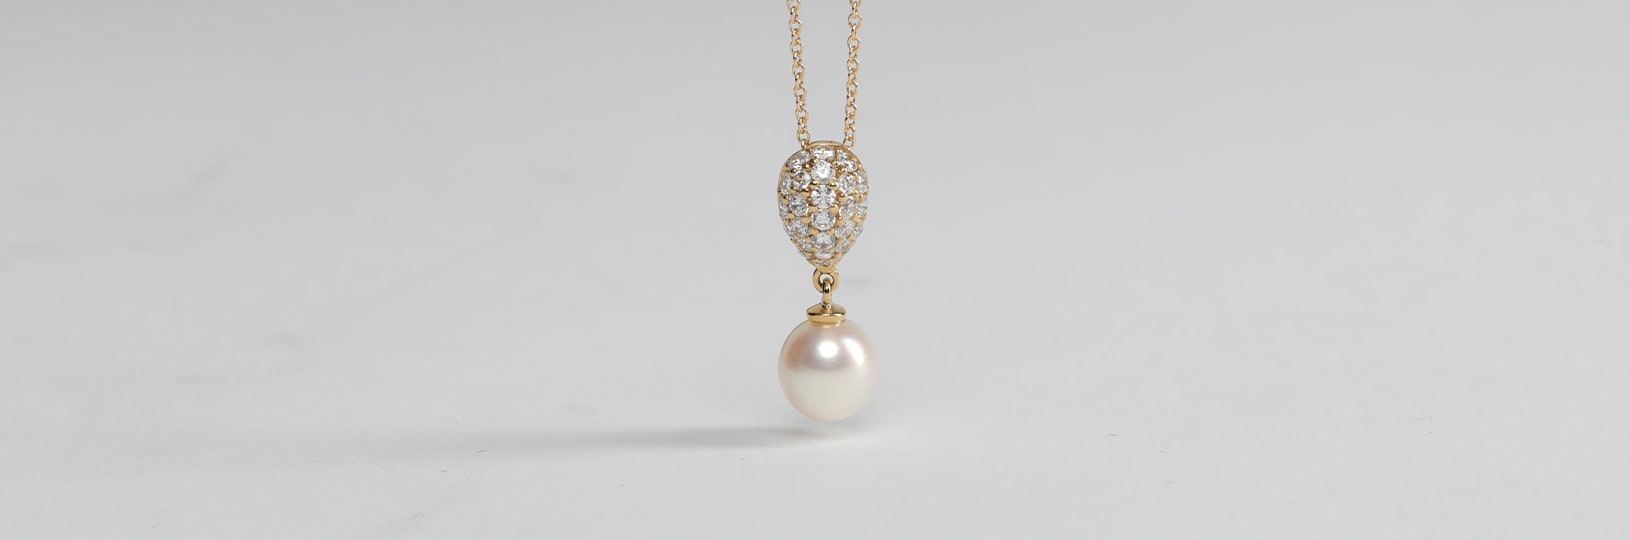 what does the pearl symbolize